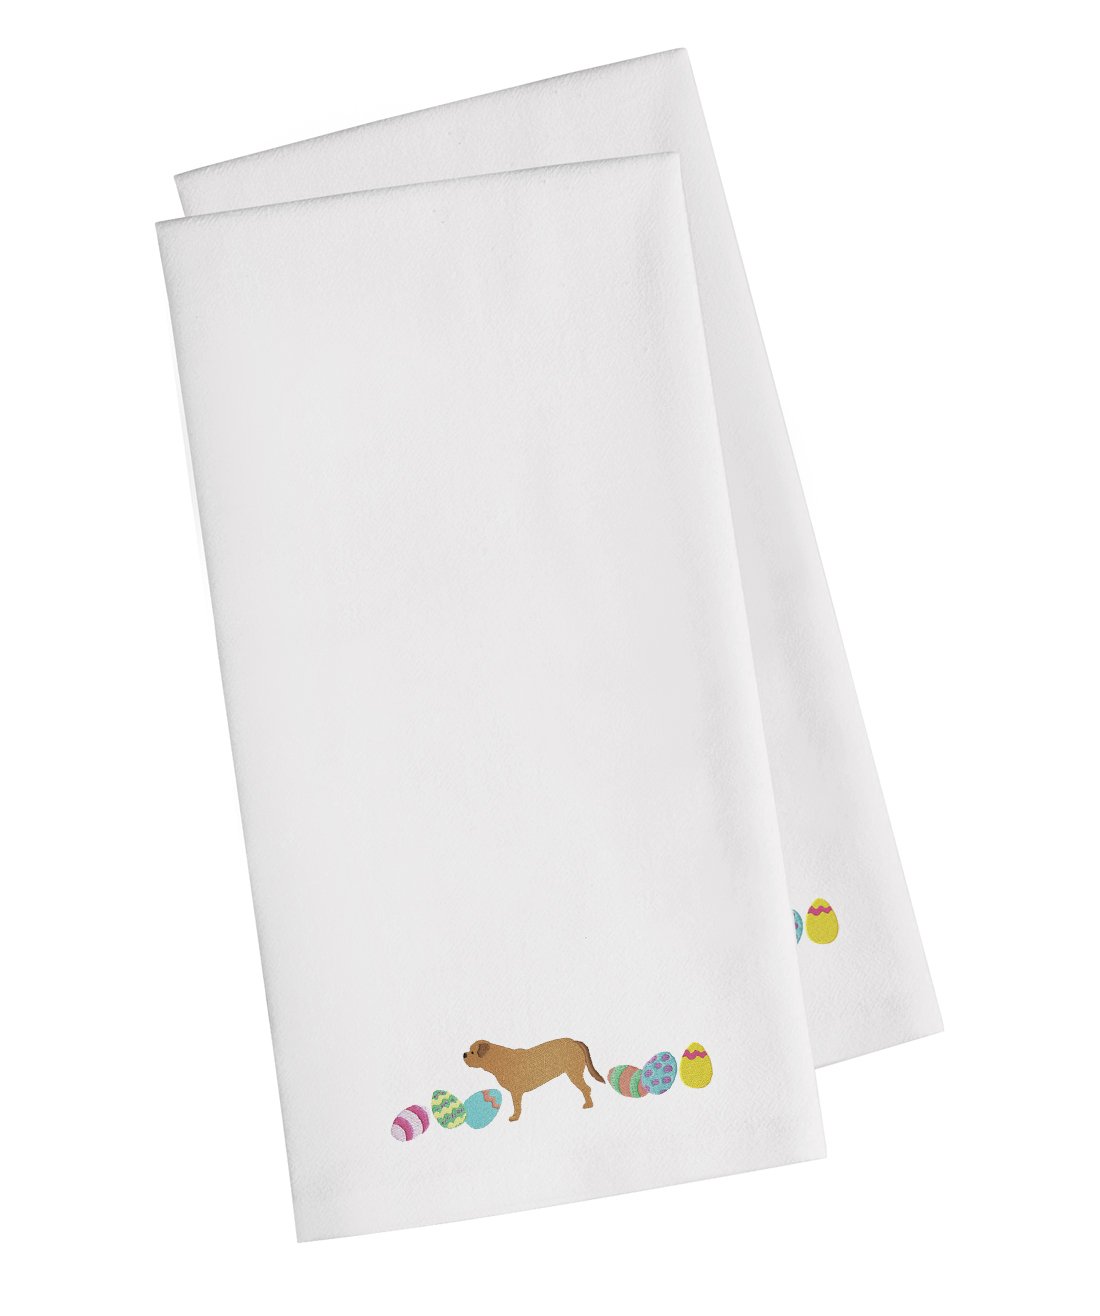 Dogue de Bordeaux Easter White Embroidered Kitchen Towel Set of 2 CK1635WHTWE by Caroline's Treasures